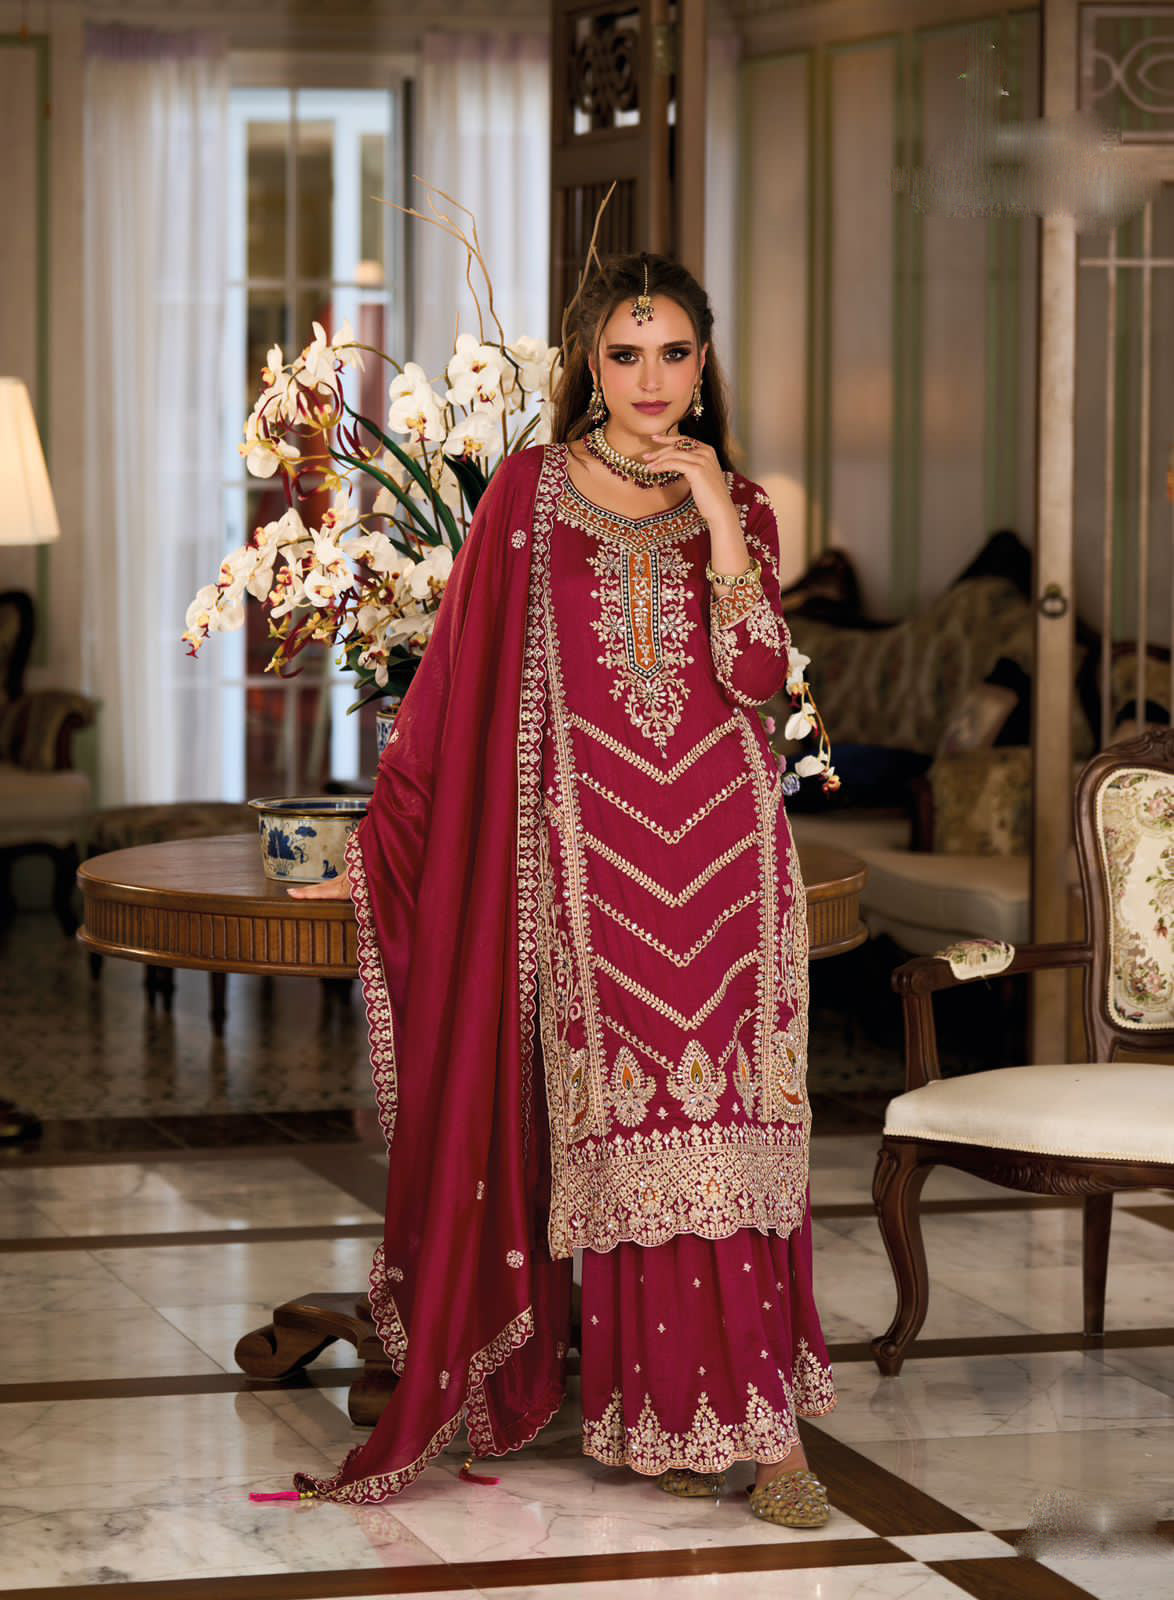 Dazzling Pink Color Premium Silk And Embroidery Work Sharara Suits With Dupatta For Women In Chandler